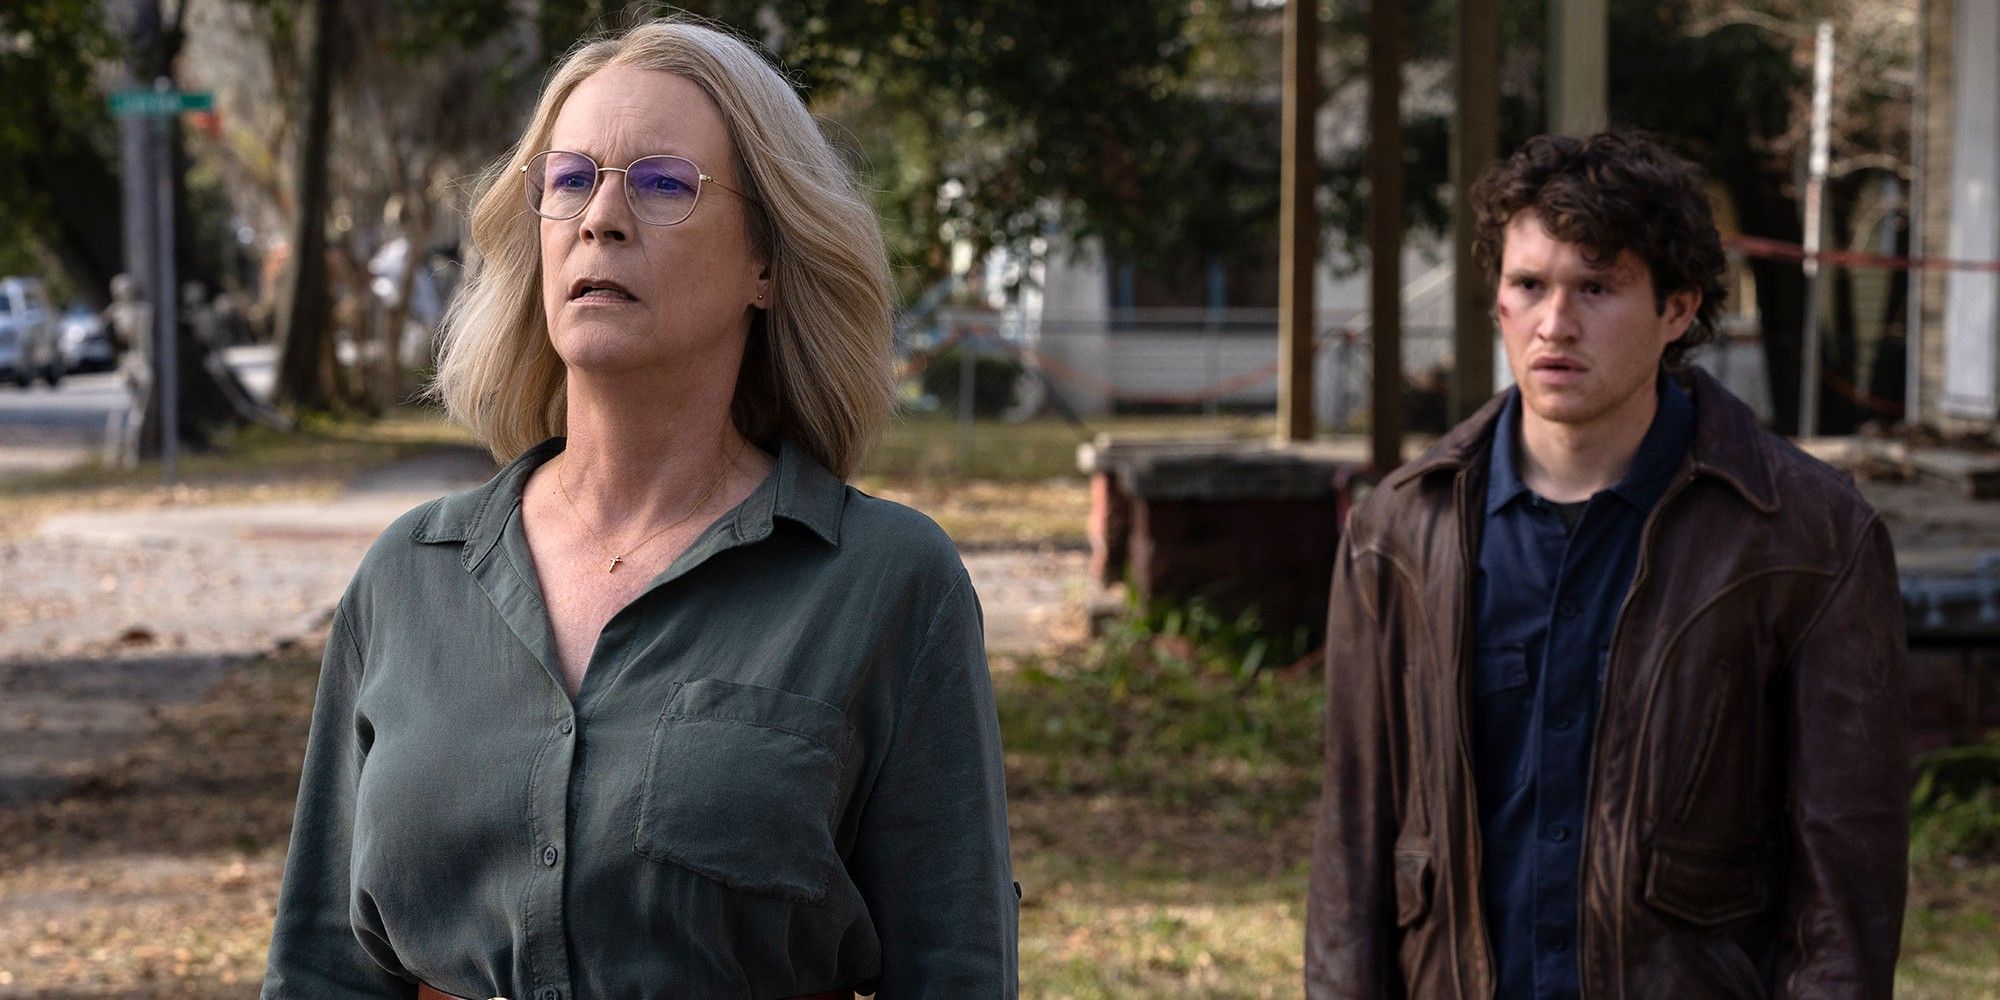 Jamie Lee Curtis and Rohan Campbell in Halloween Ends.